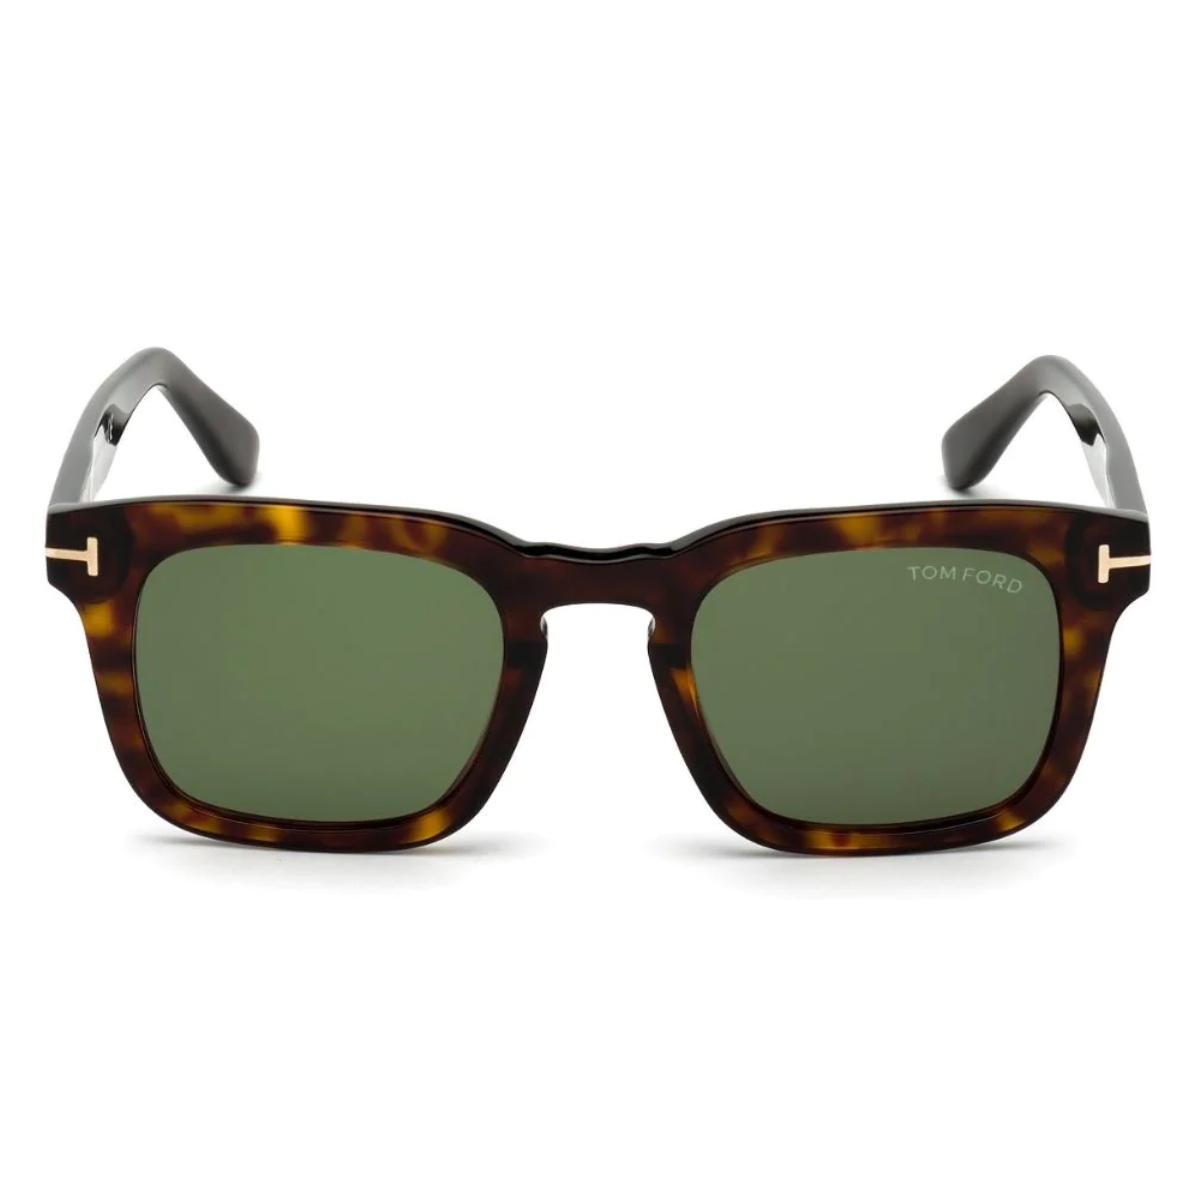 "Tom Ford 751 sunglasses for men and women, highlighting their status as top-rated accessories, crafted with premium materials like acetate and polycarbonate, perfect for elevating any ensemble."